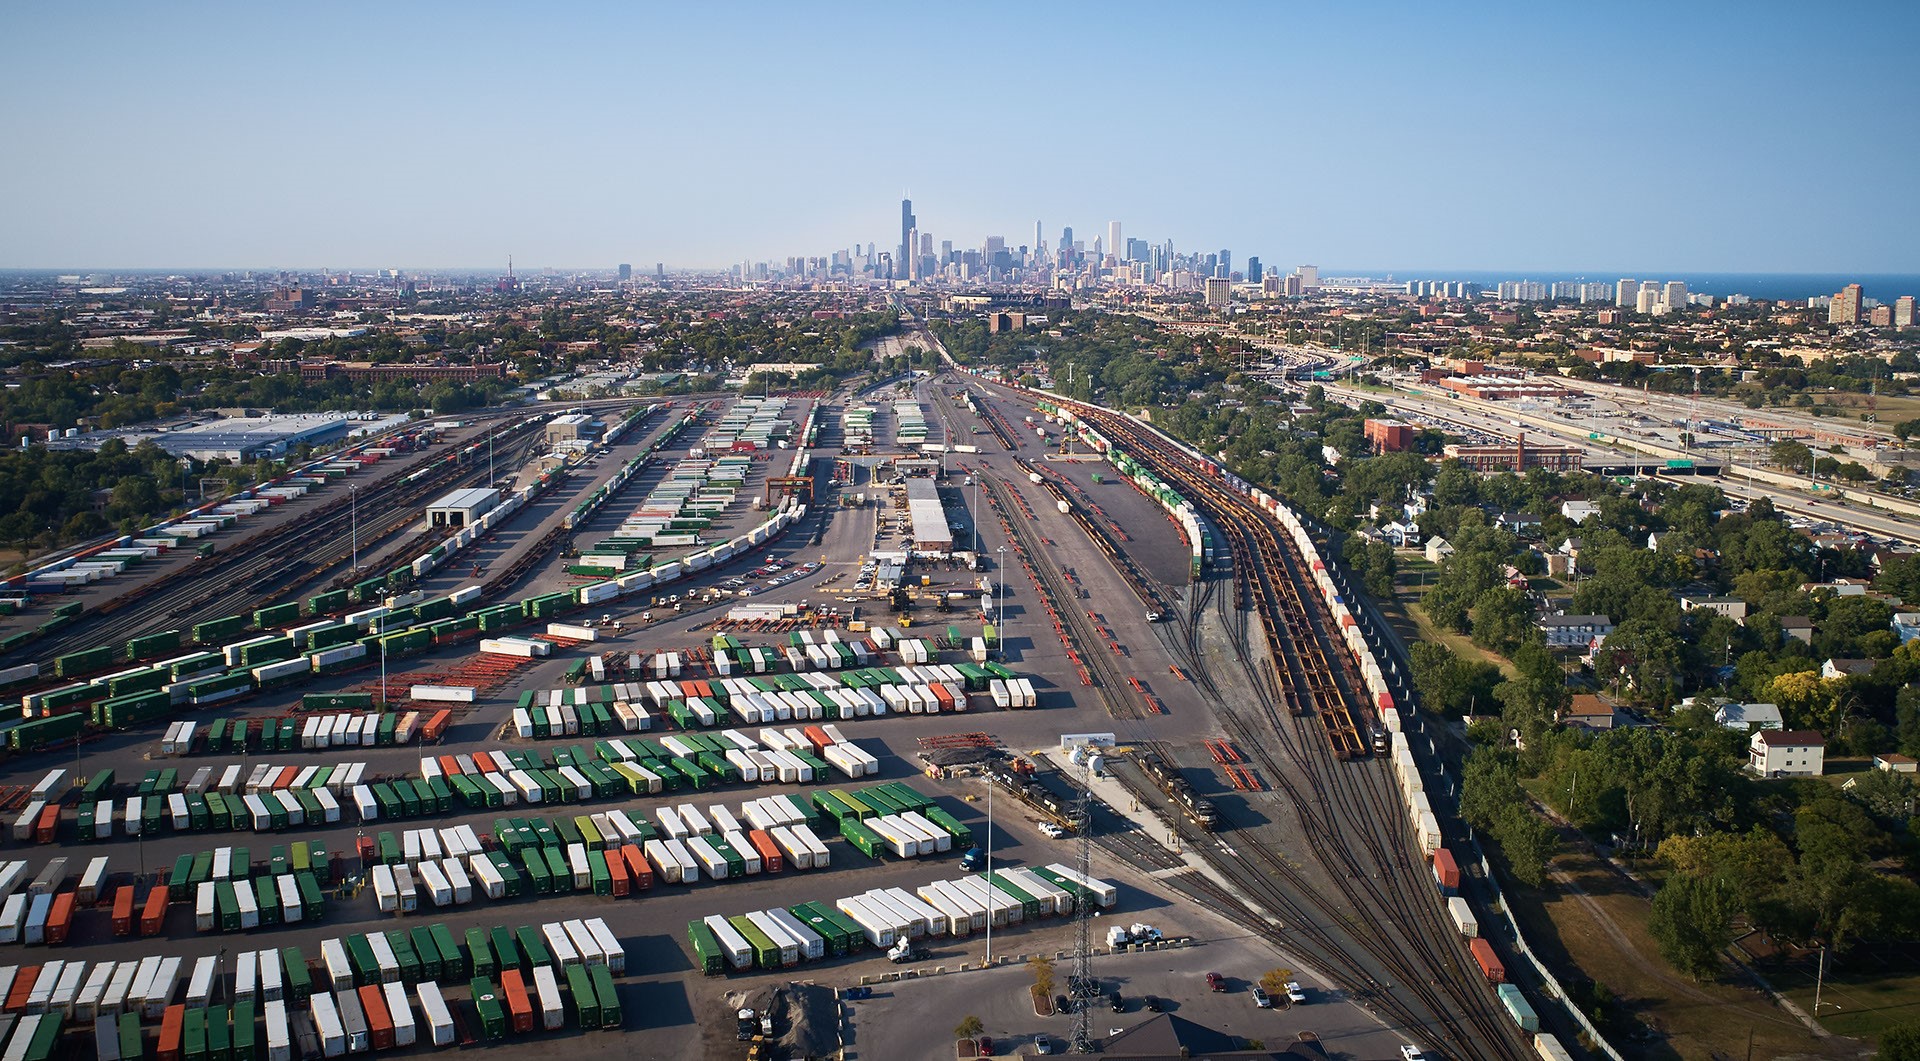 Railyard with boxcars. Chicago skyline in background